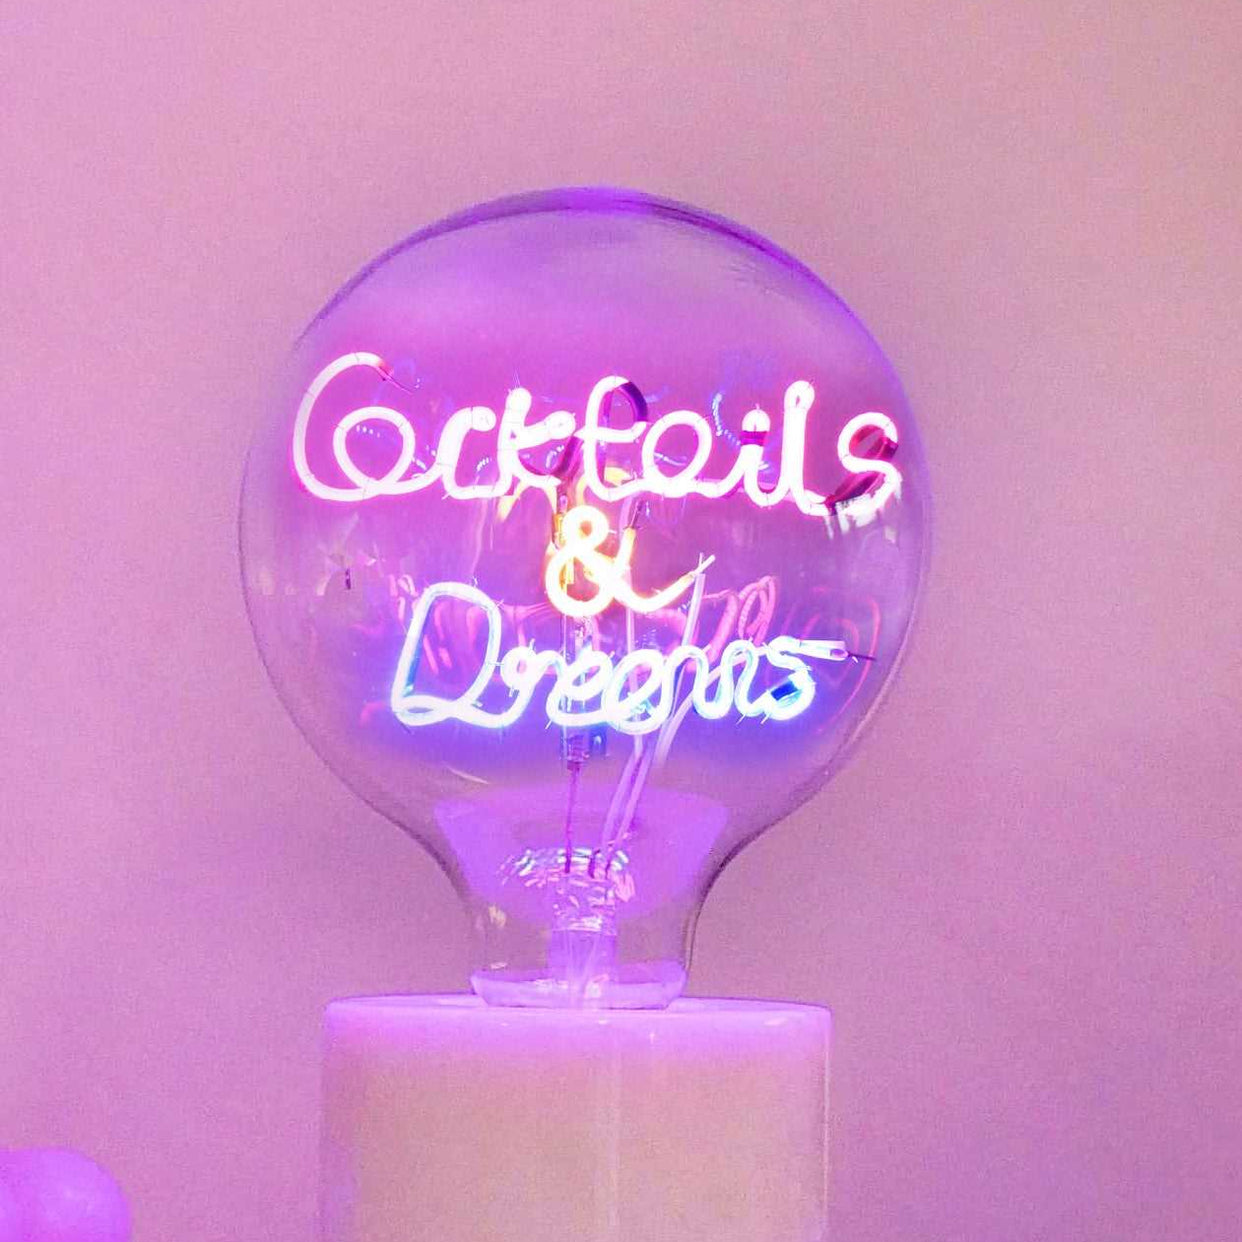 Cocktails & Dreams LED Light Bulb - Screw Down Table Top Fitting - E27 Edison Dimmable